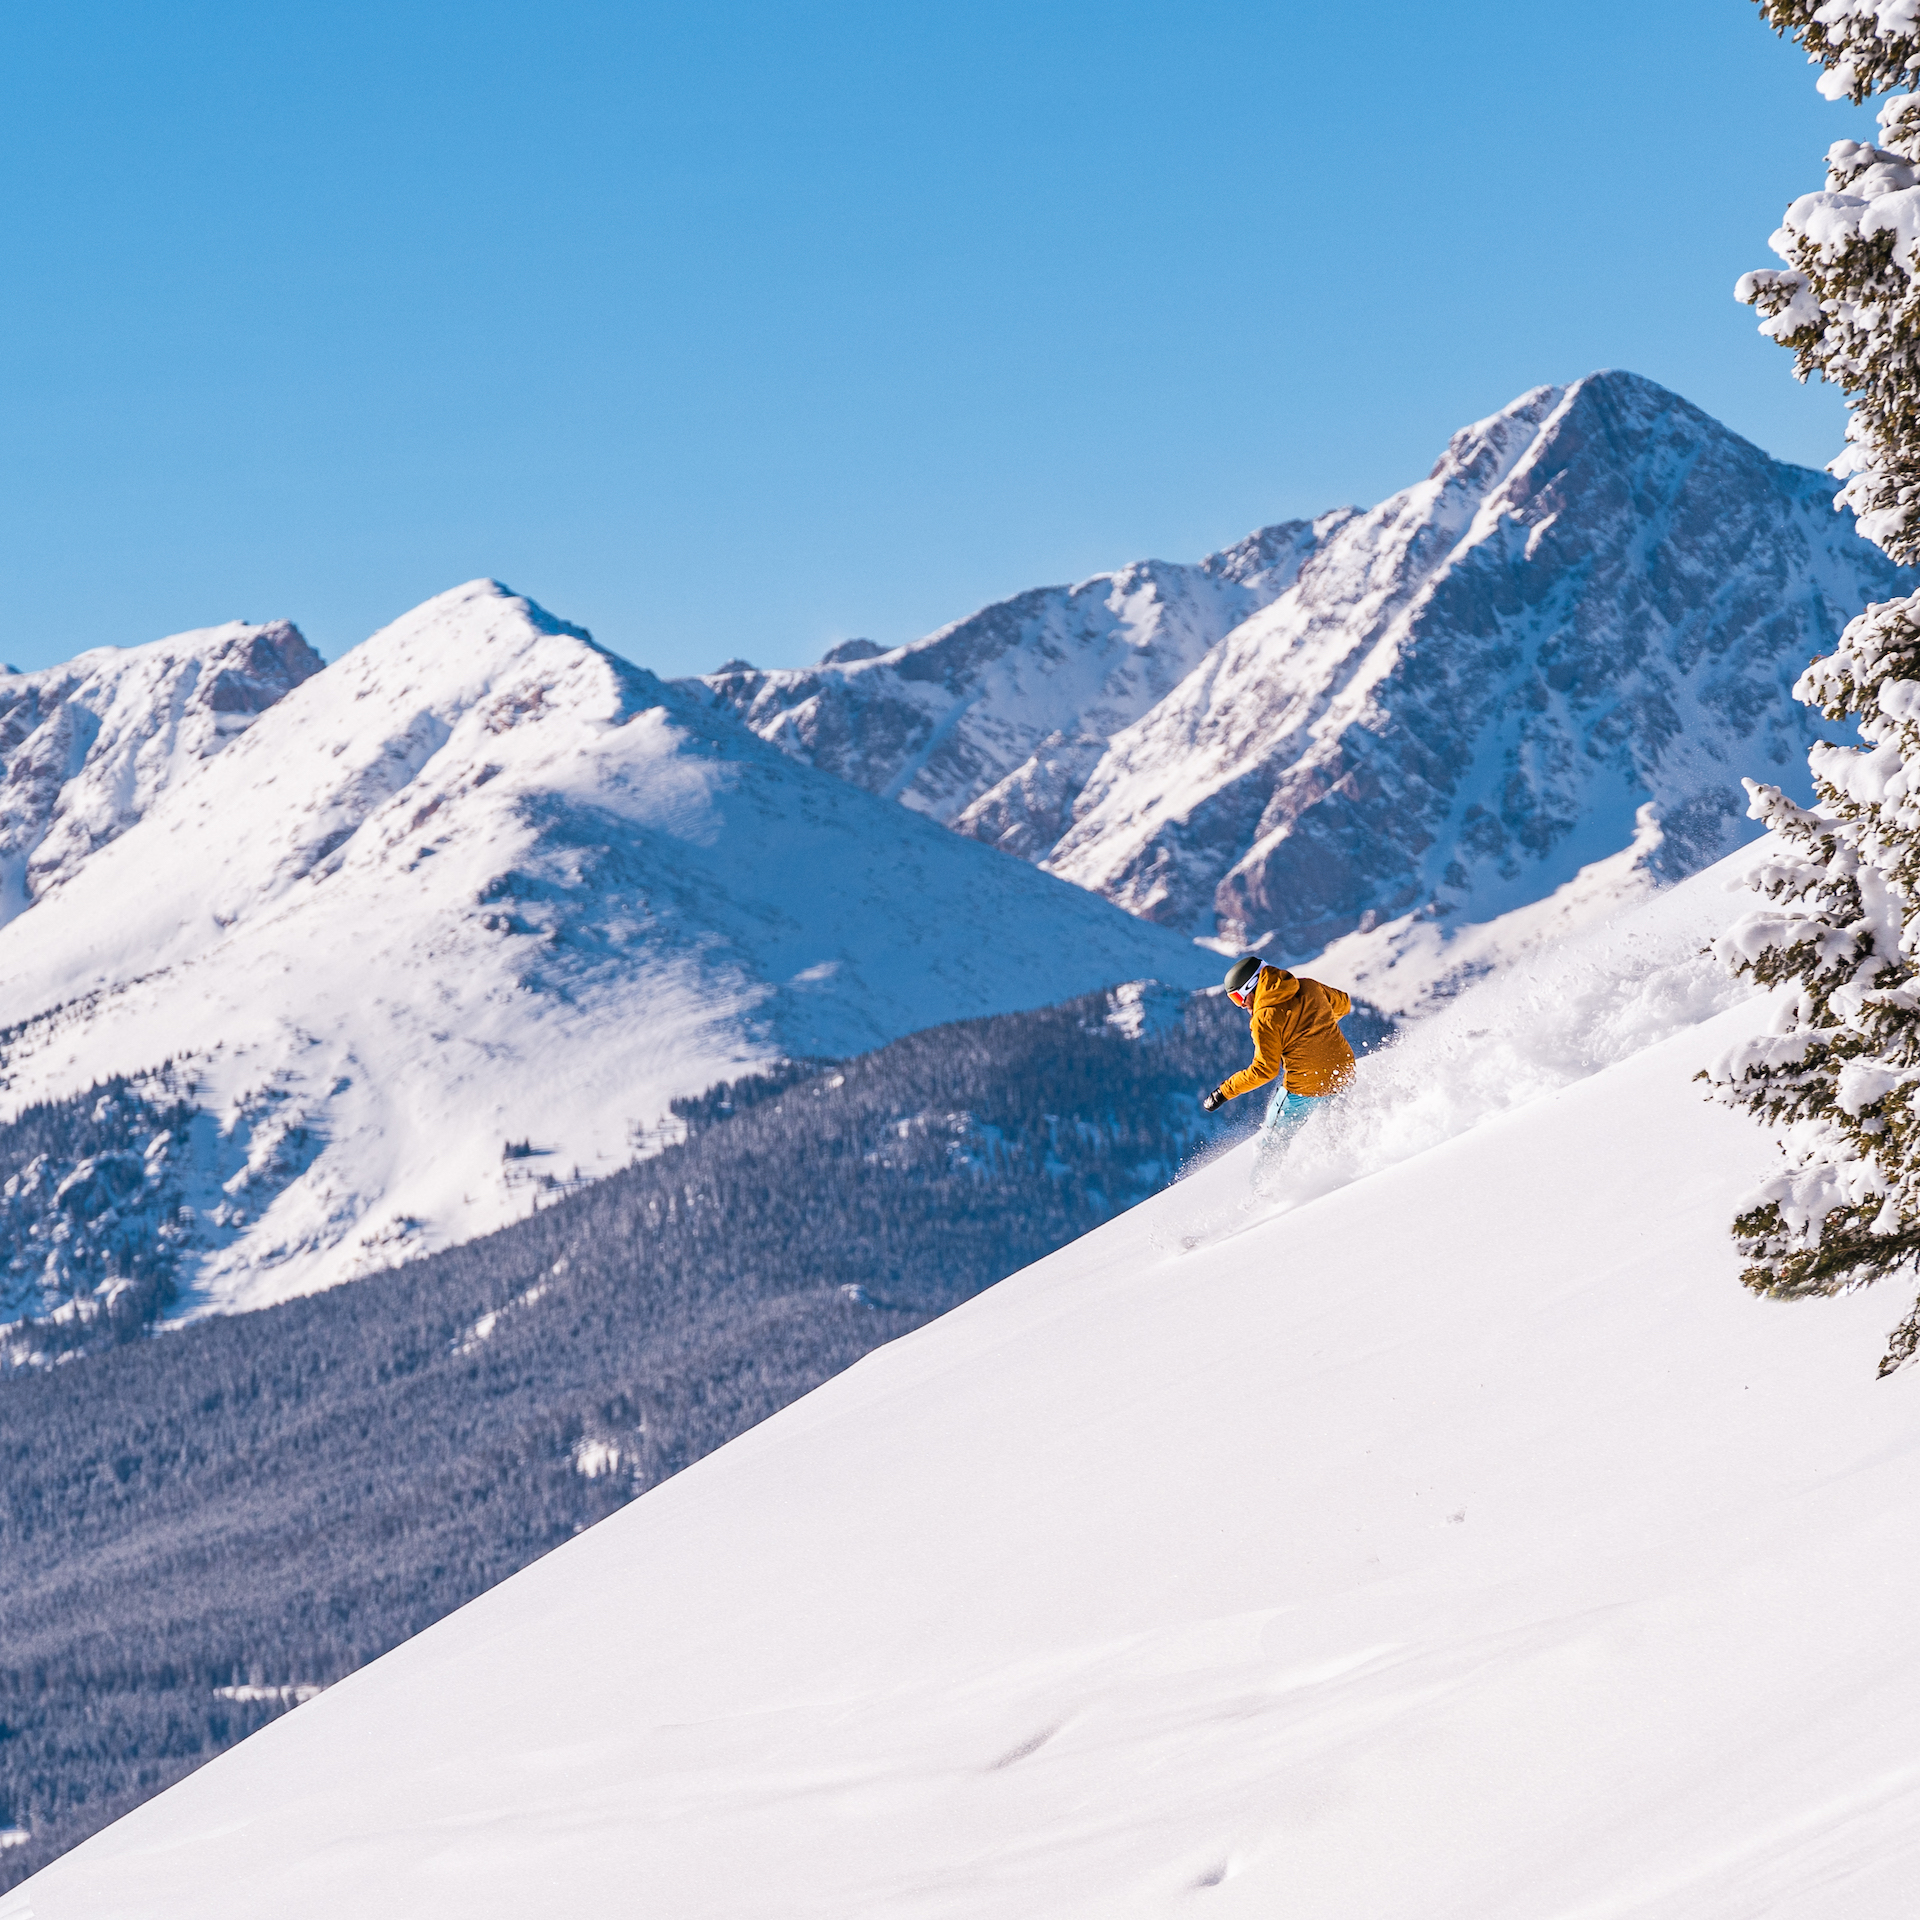 Planning Your 2018 Christmas Vacation in Keystone, Colorado - Peak 1 Express